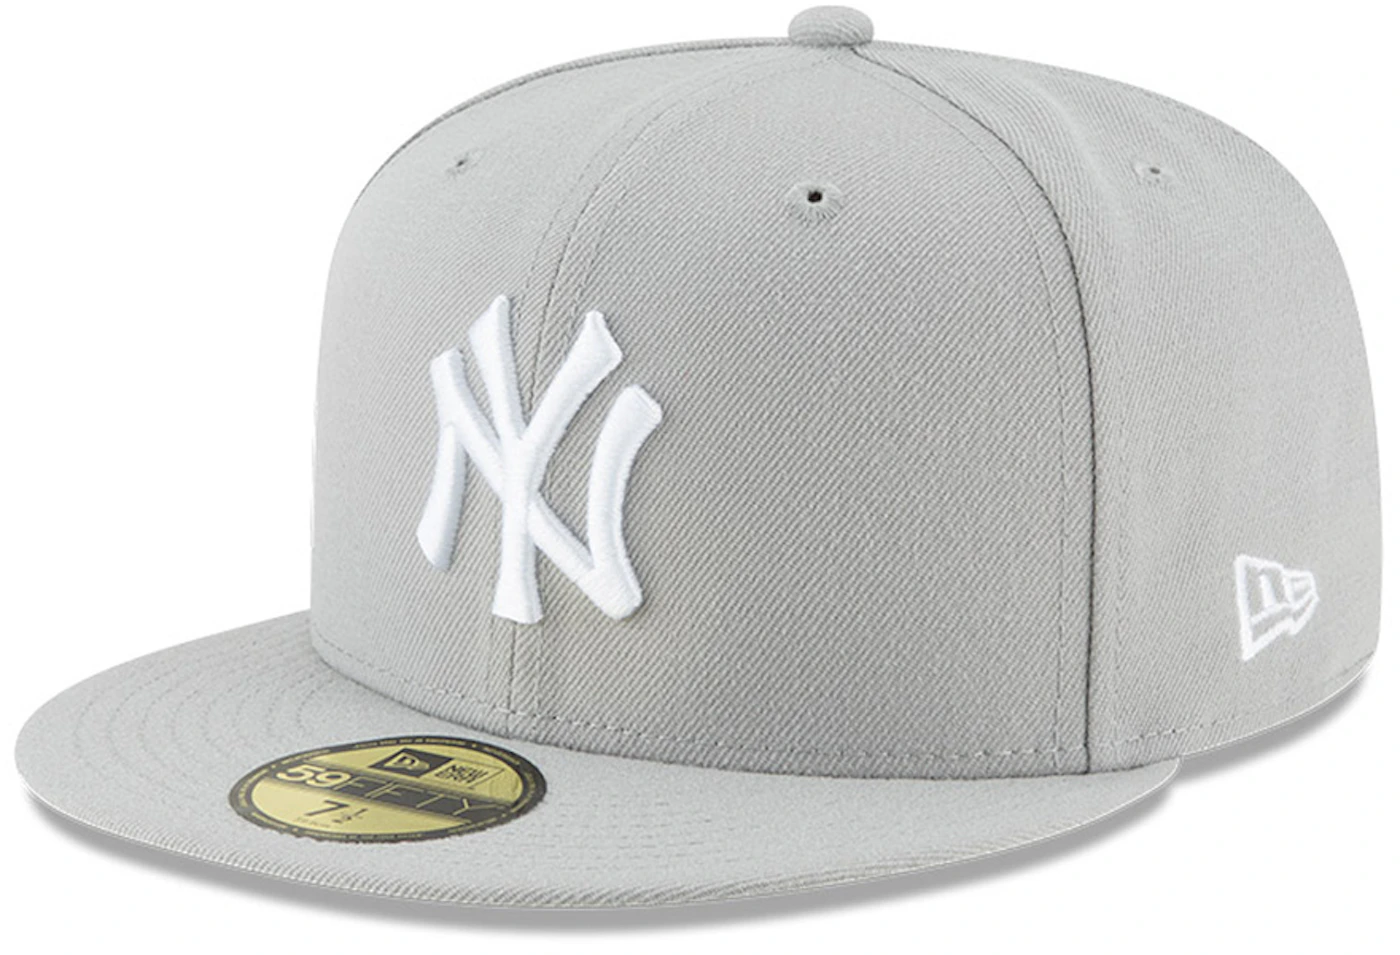 Eric Emanuel EE Ne New York Yankees 59FIFTY Fitted Hat Navy